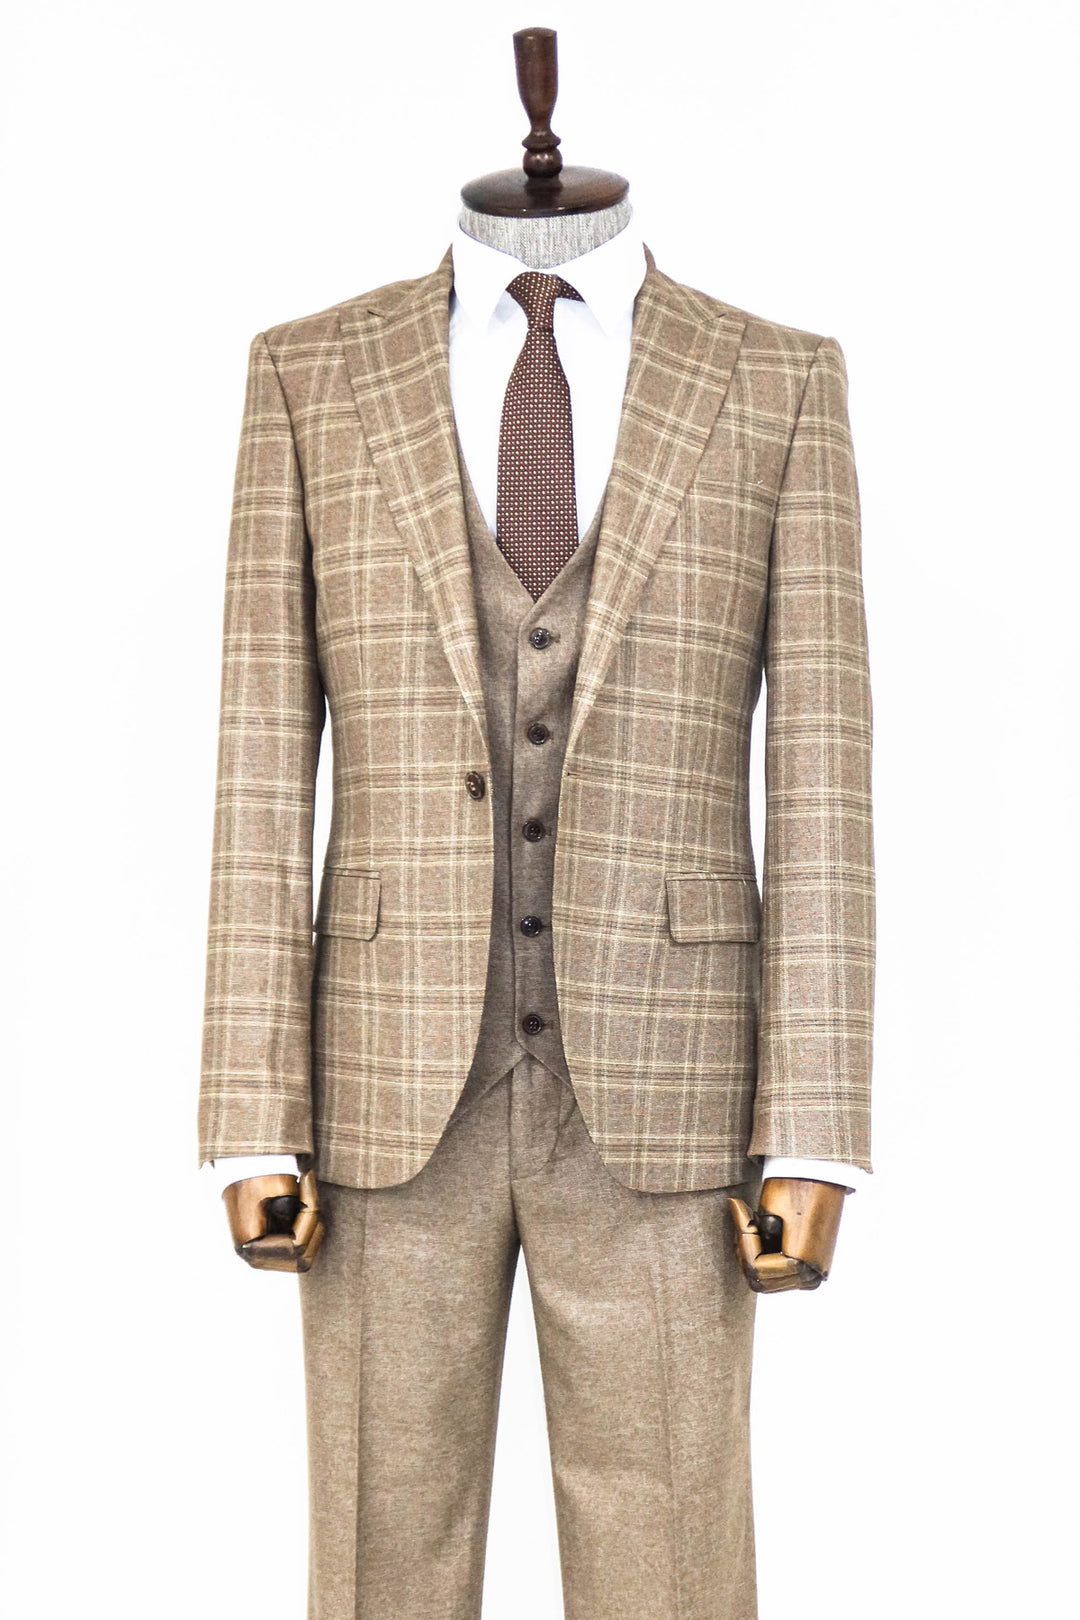 Checked Slim Fit Brown Men Suit and Shirts Combination- Wessi